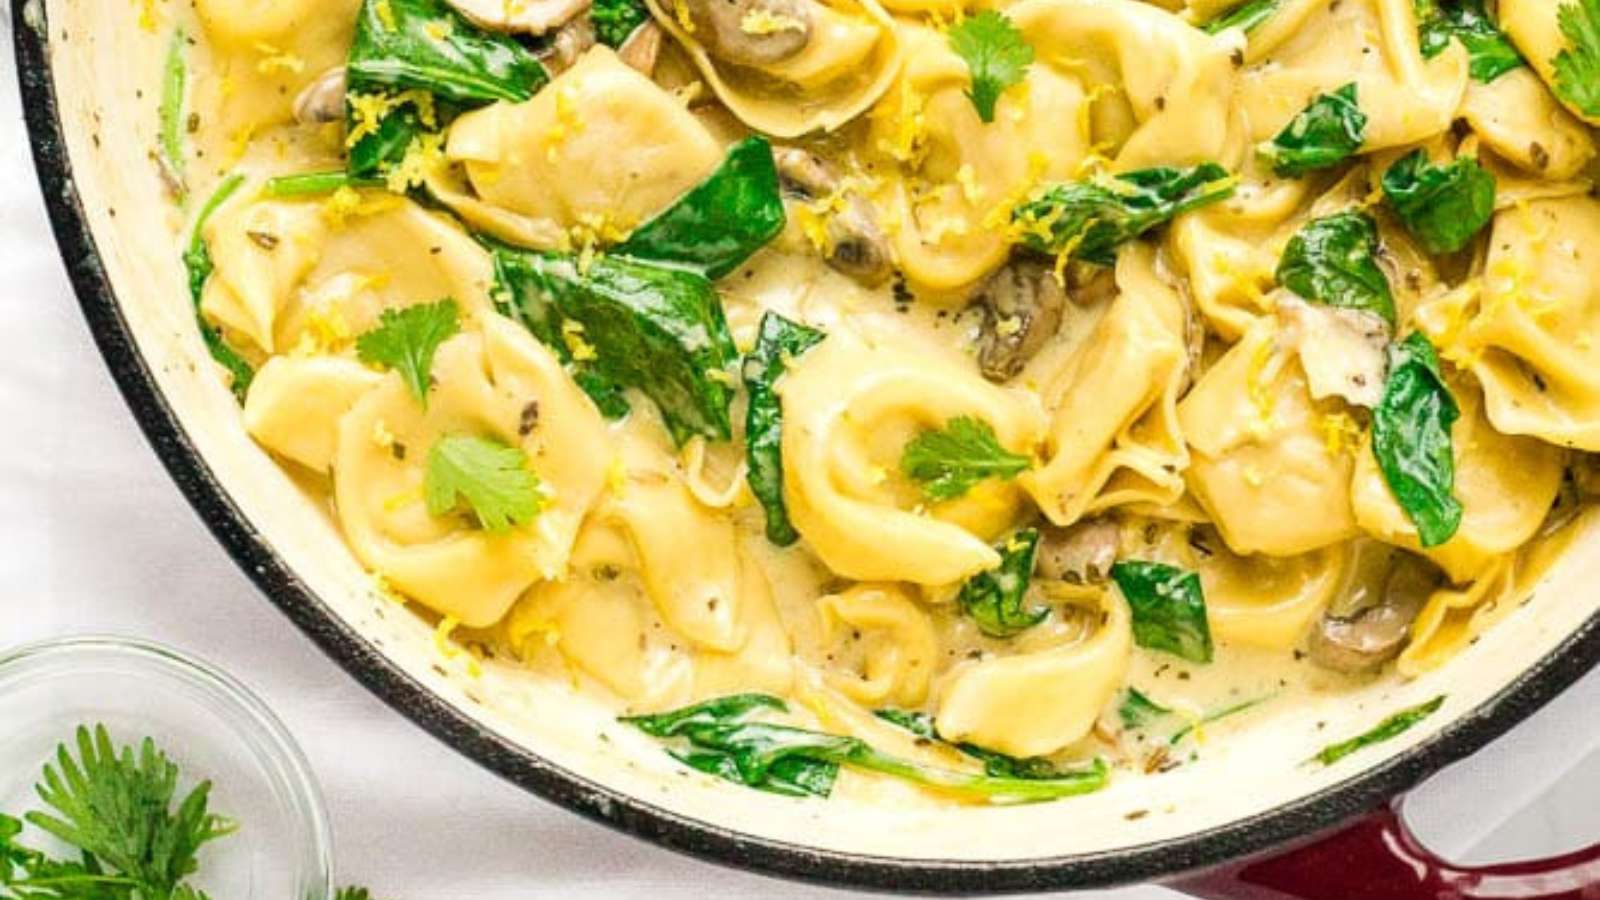 A bowl of pasta with spinach and mushrooms.